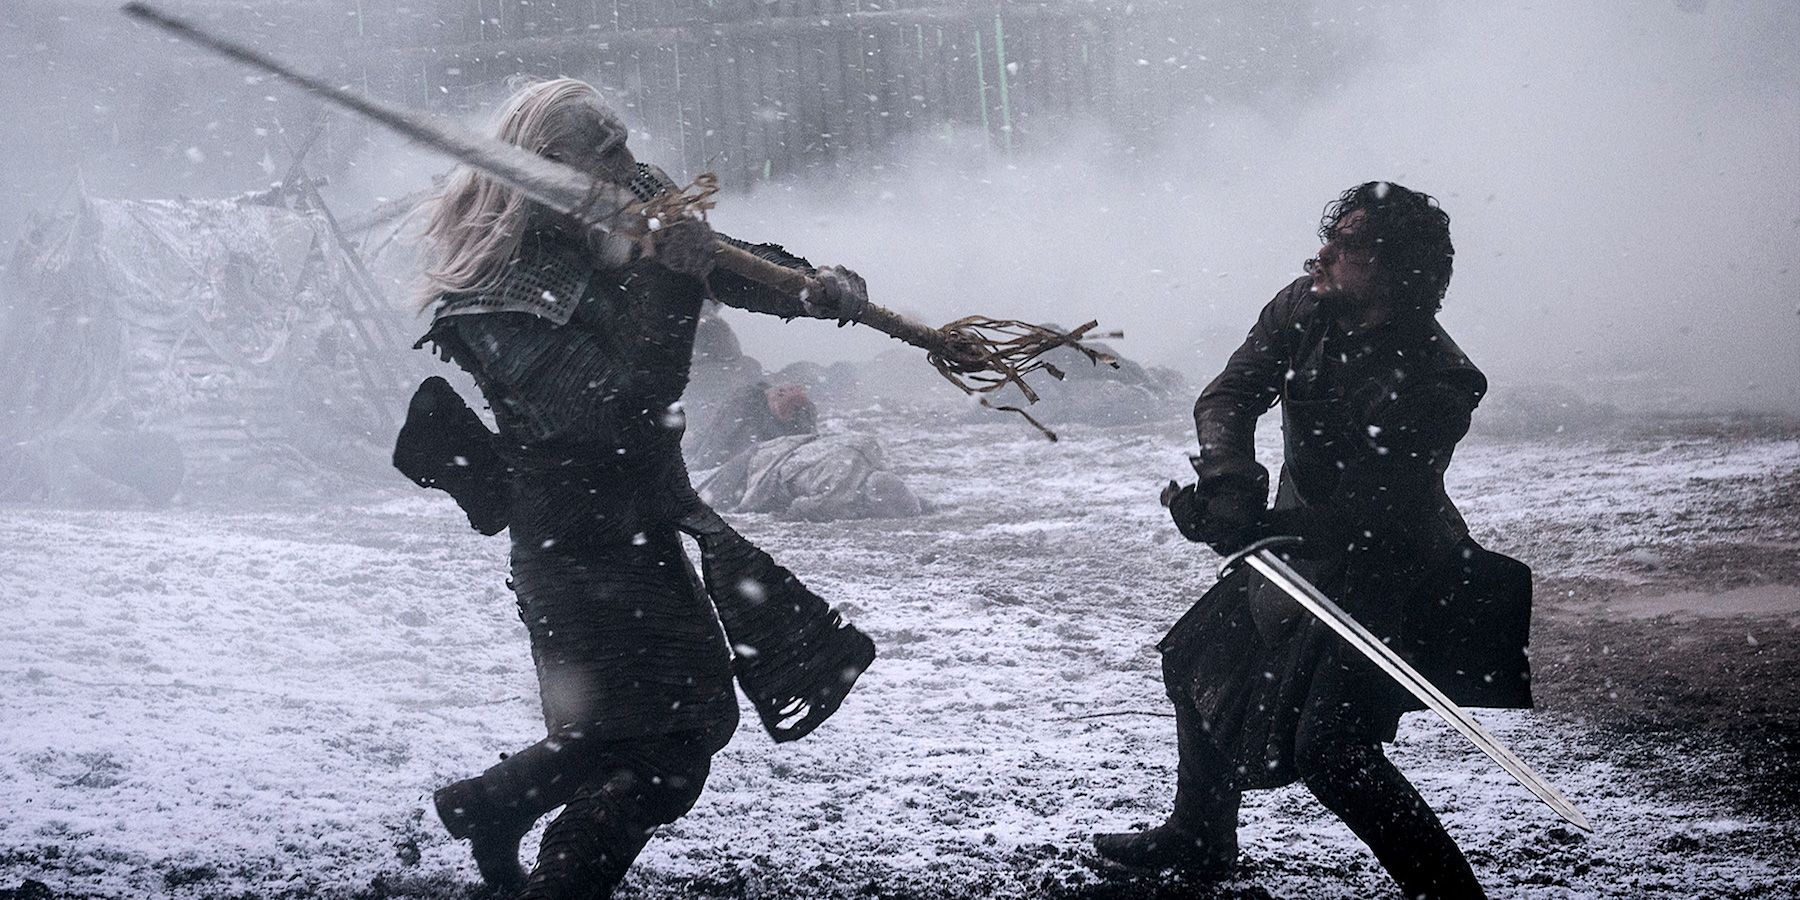 Jon Snow fights White Walker in Game of Thrones episode Hardhome